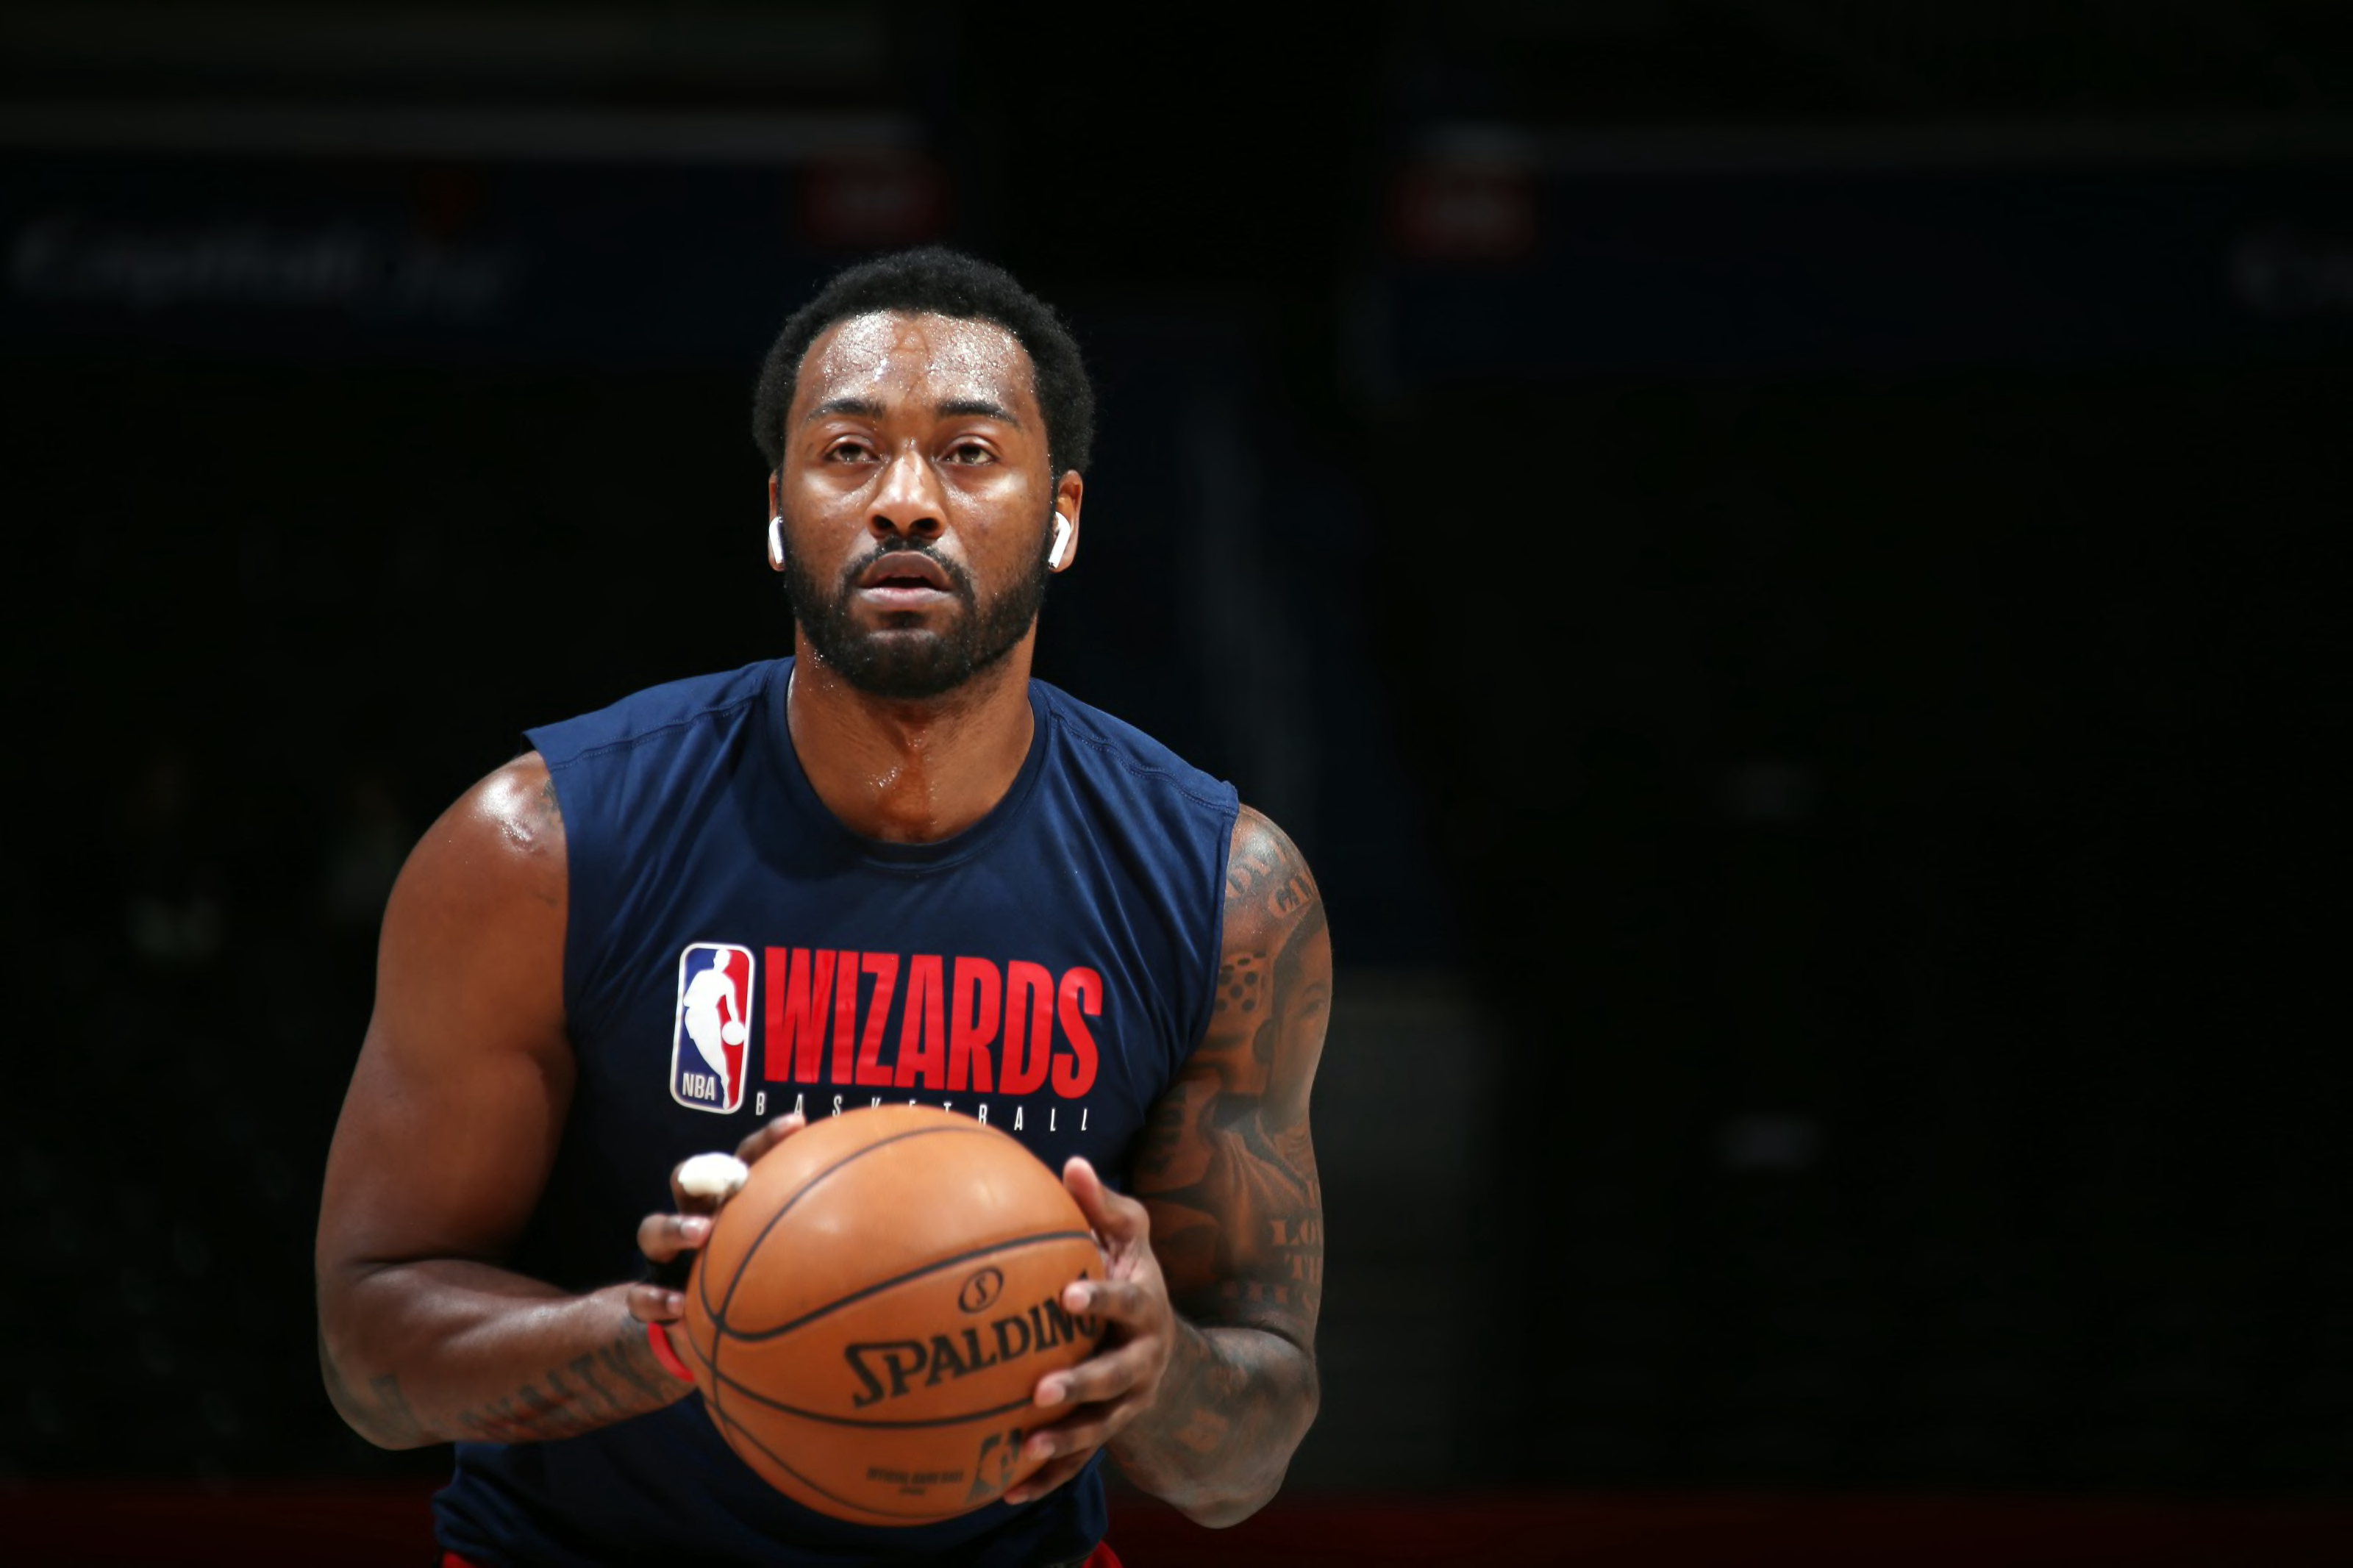 NBA: If the Wizards bring back Wall, they need a plan - Bullets